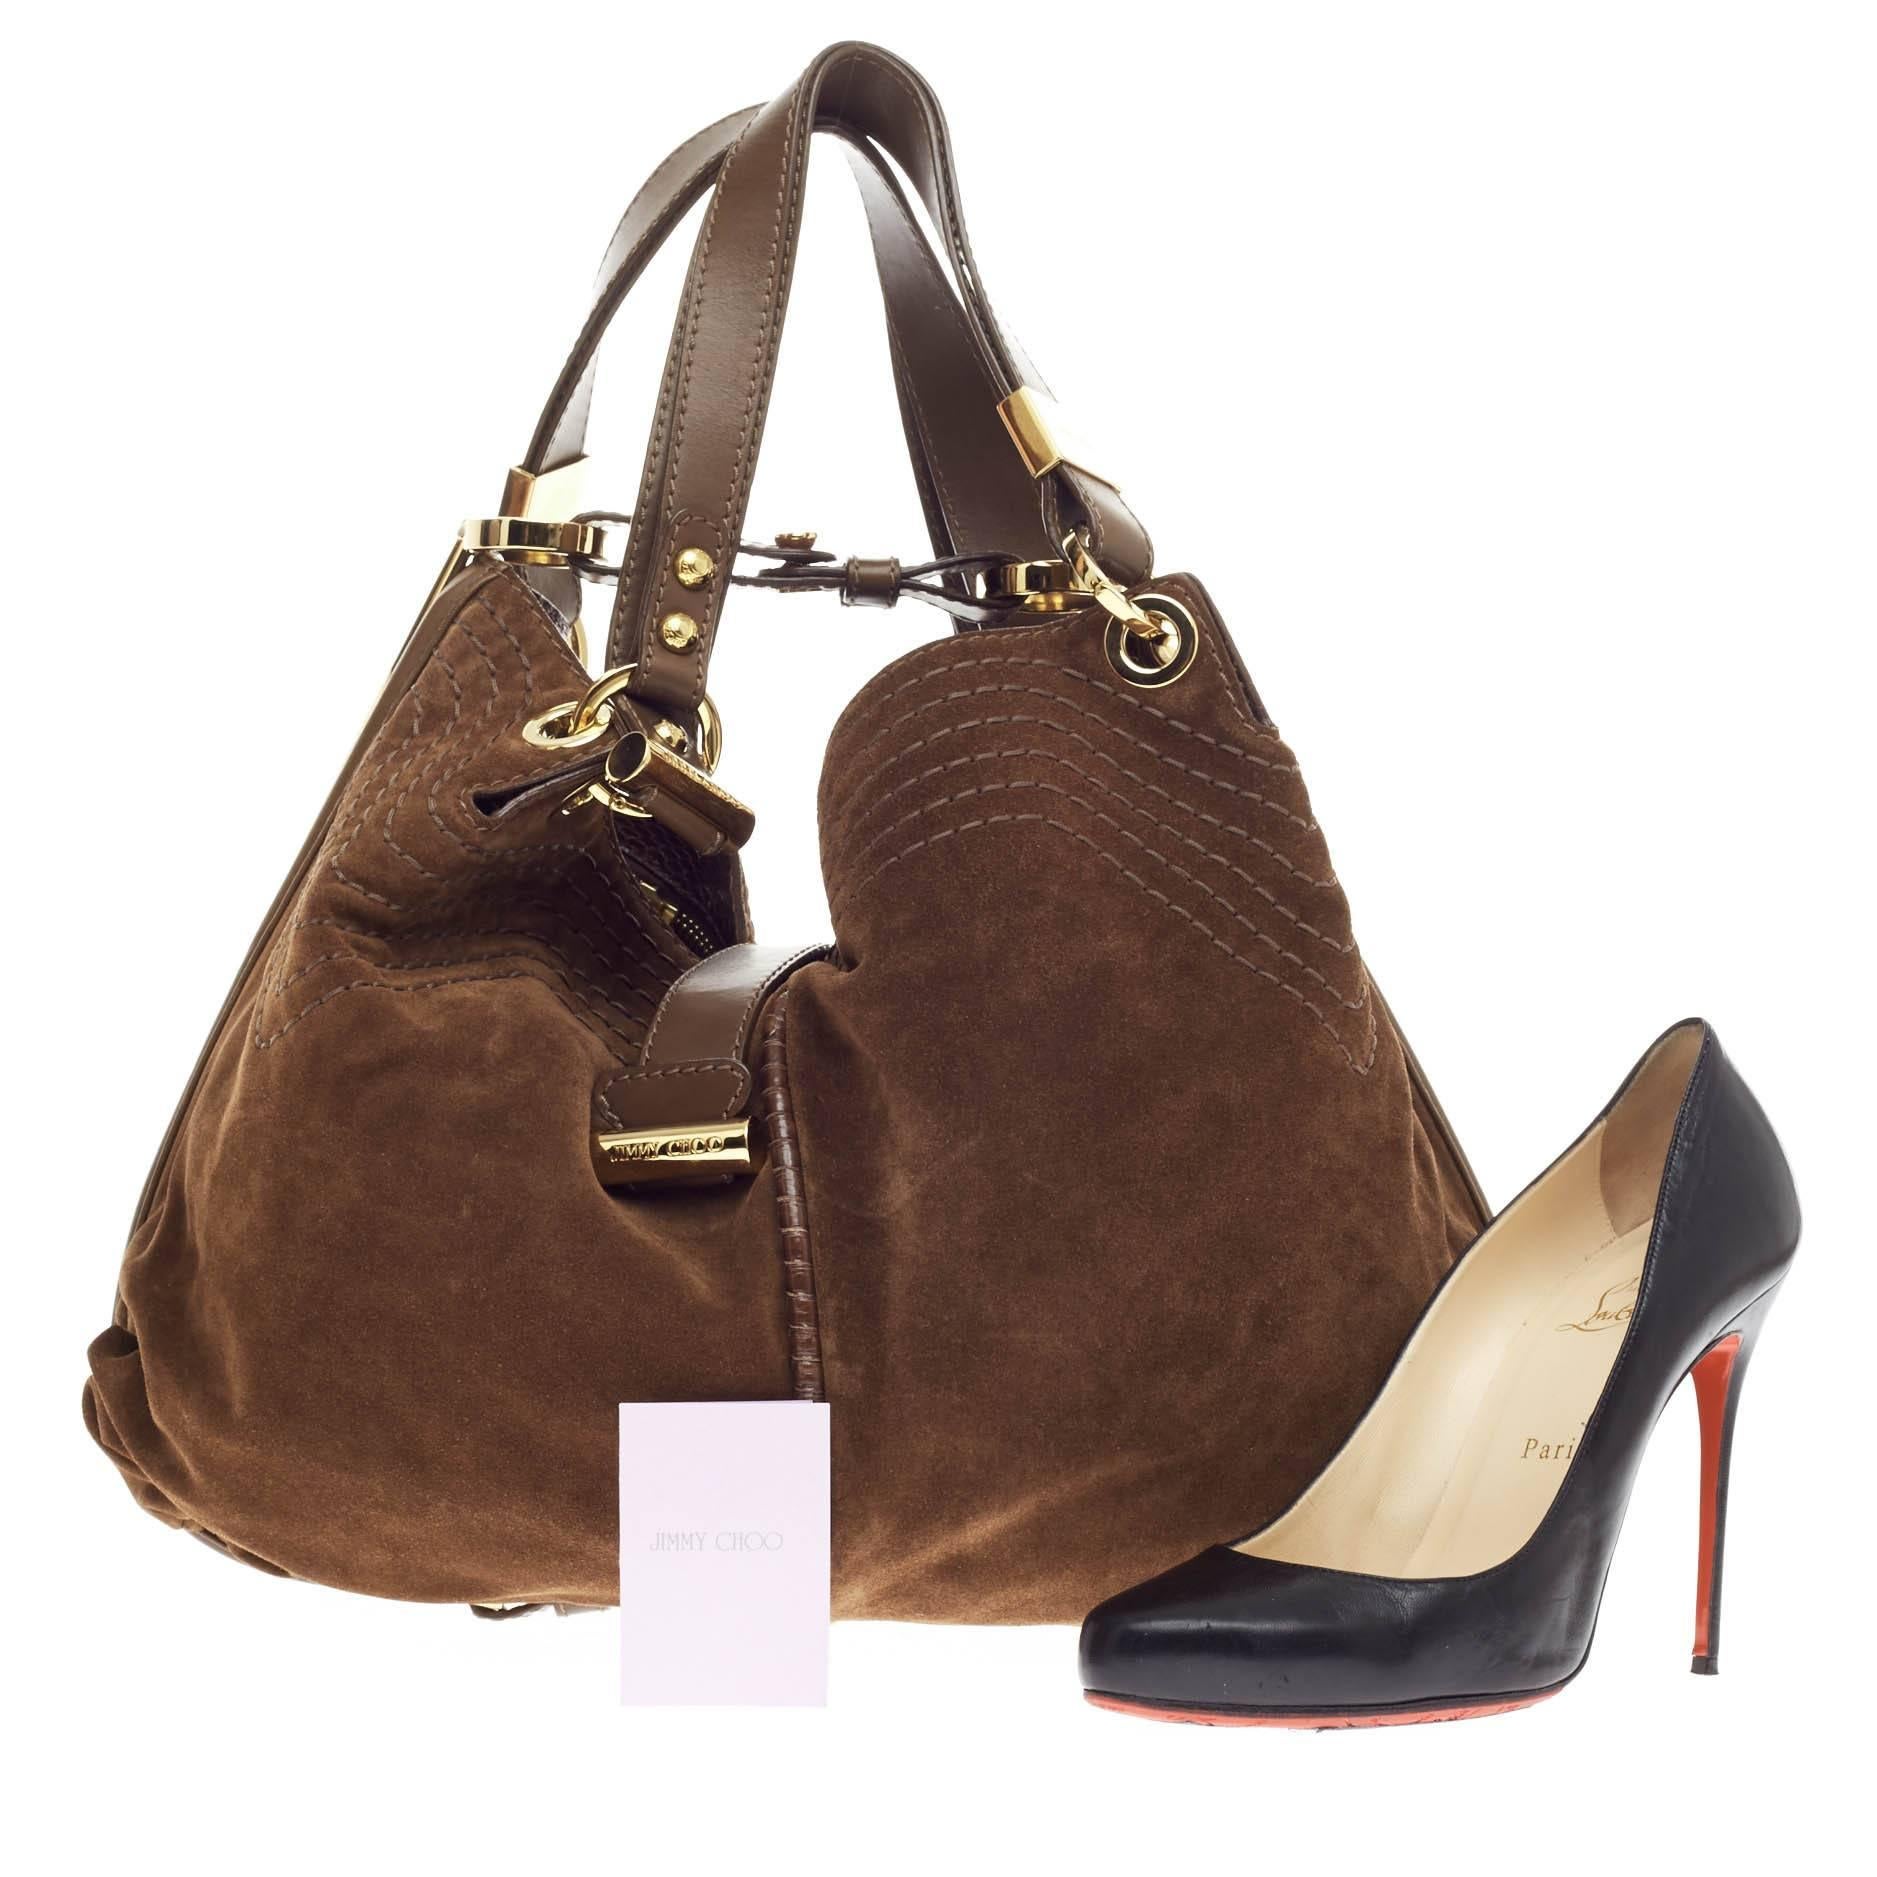 This authentic Jimmy Choo Alex Hobo Suede is perfect for everyday use. Crafted in dark brown suede with contrast detailed stitching and brown leather and snakeskin trimmings, this lush, slouchy hobo features dual-flat handles, contrast stitch